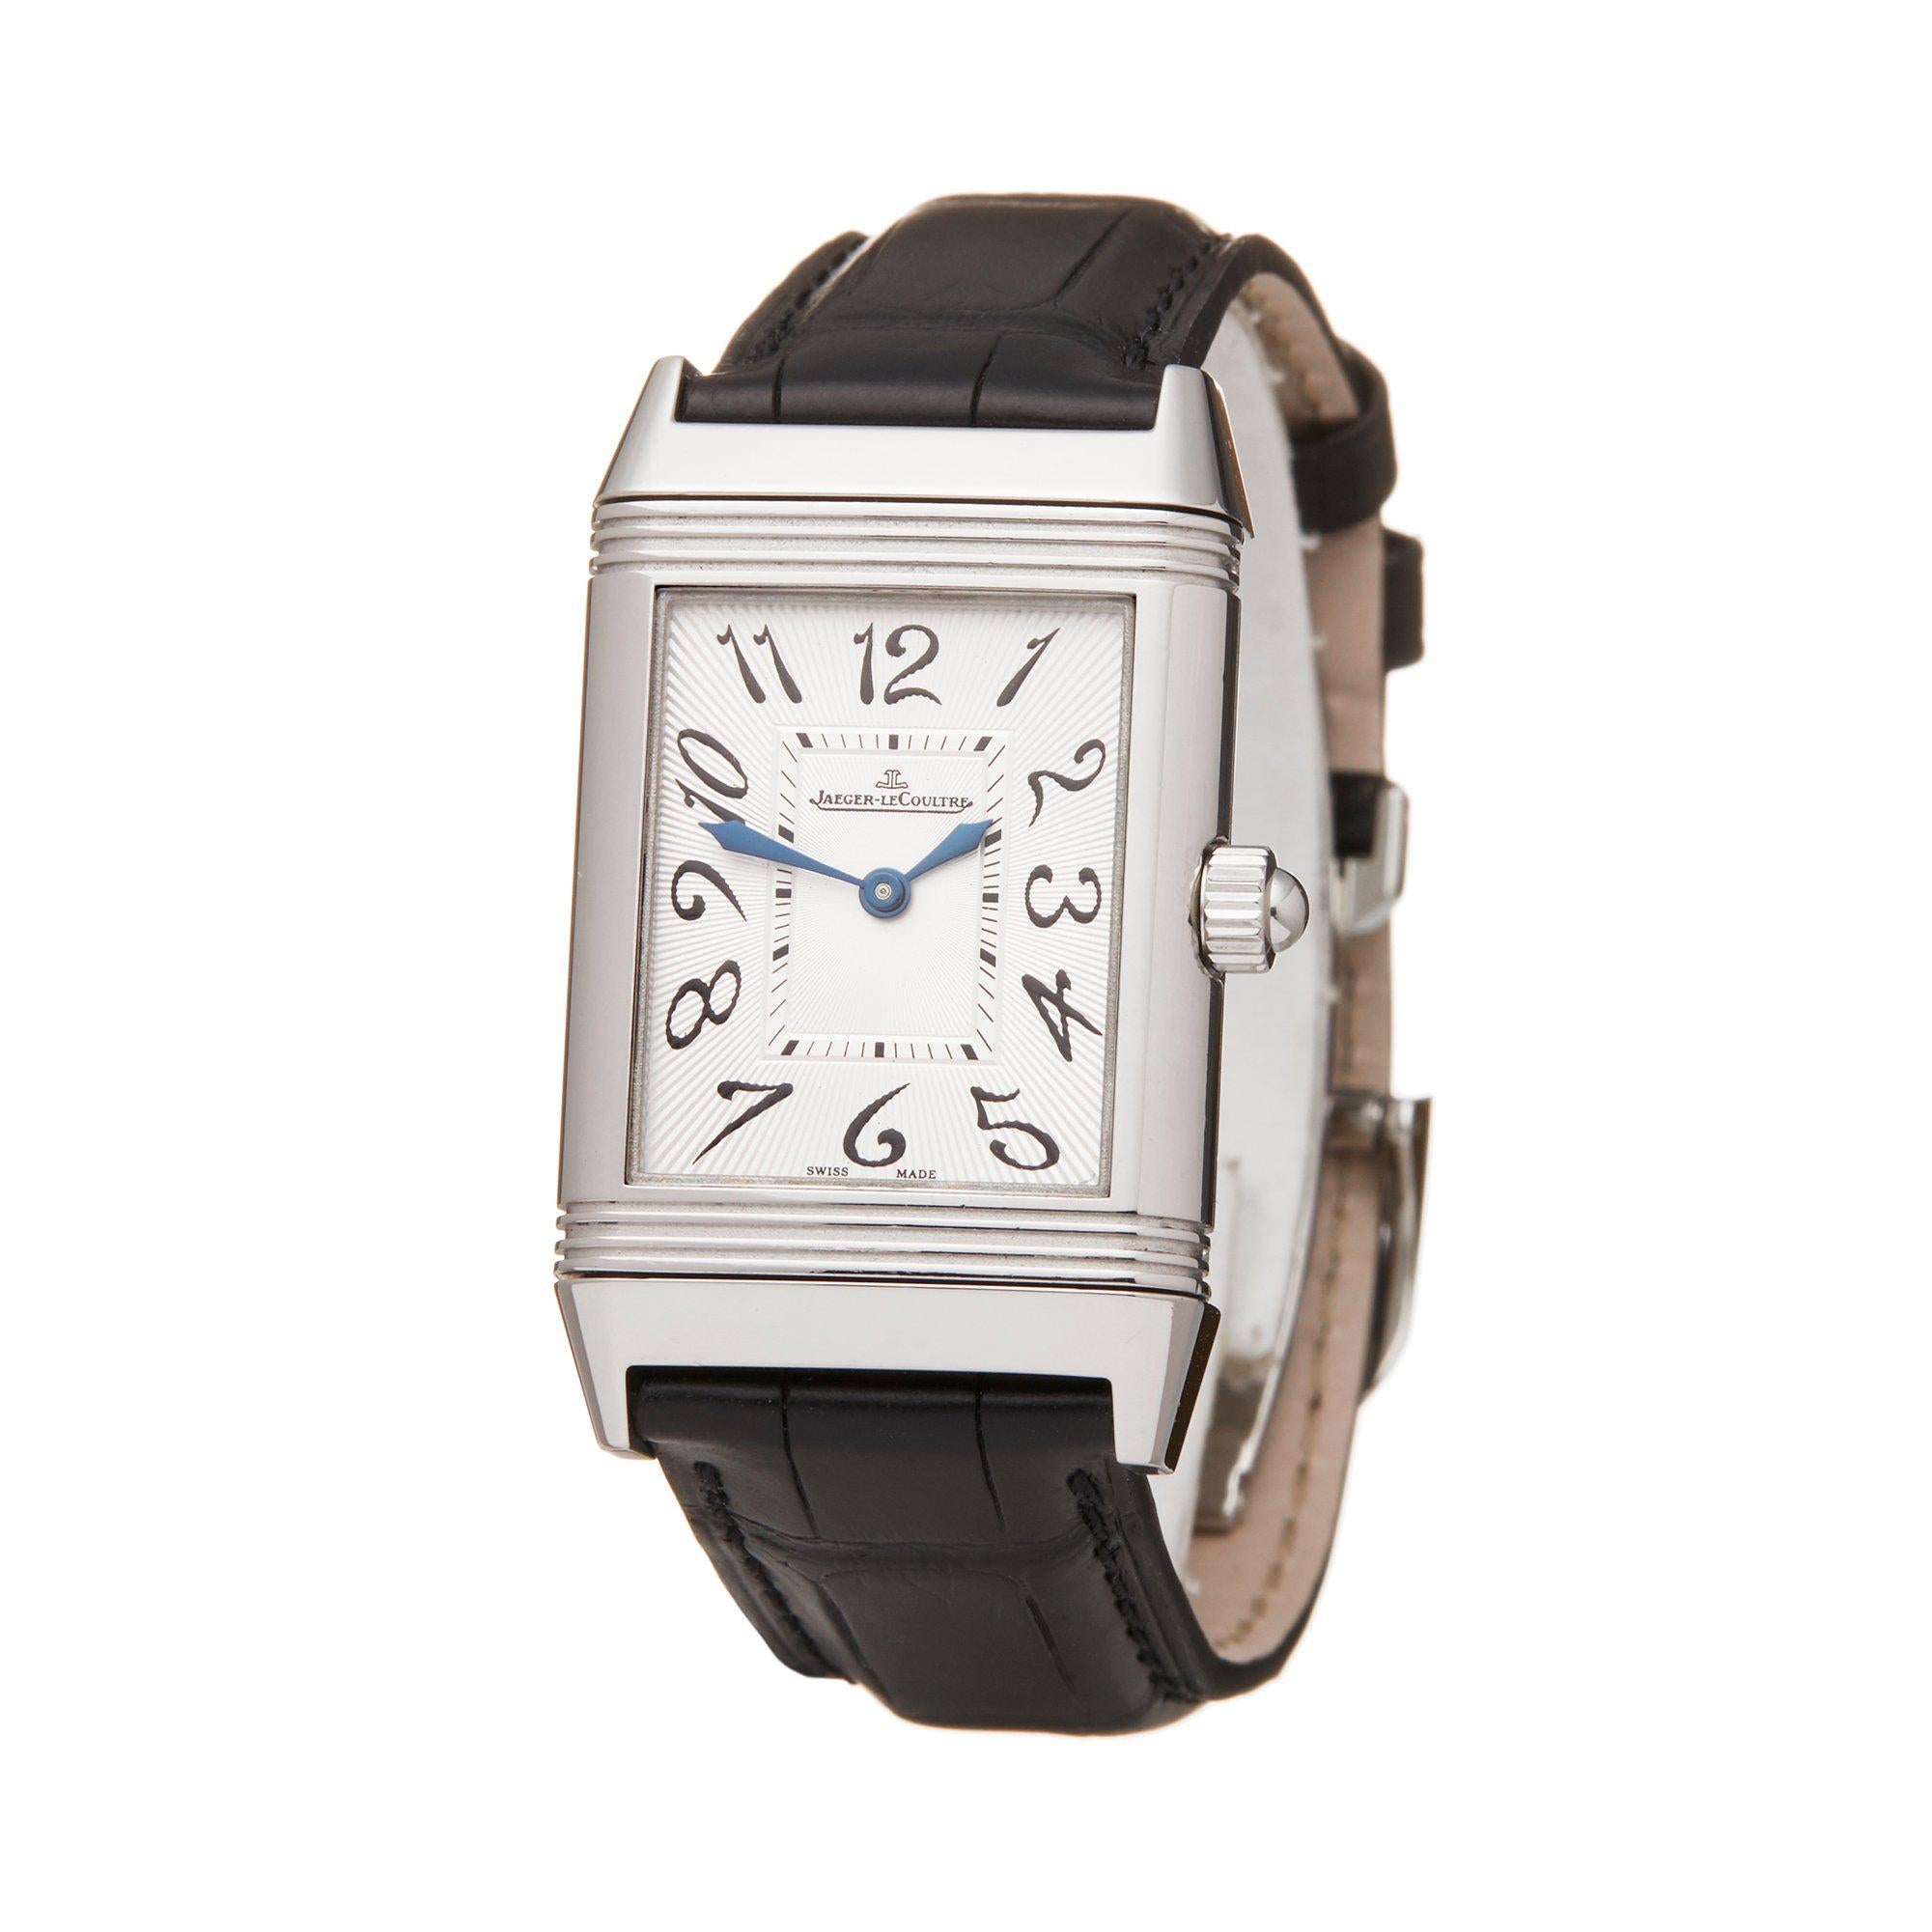 Jaeger-LeCoultre Reverso Duetto Stainless Steel 256.8.75 Wristwatch